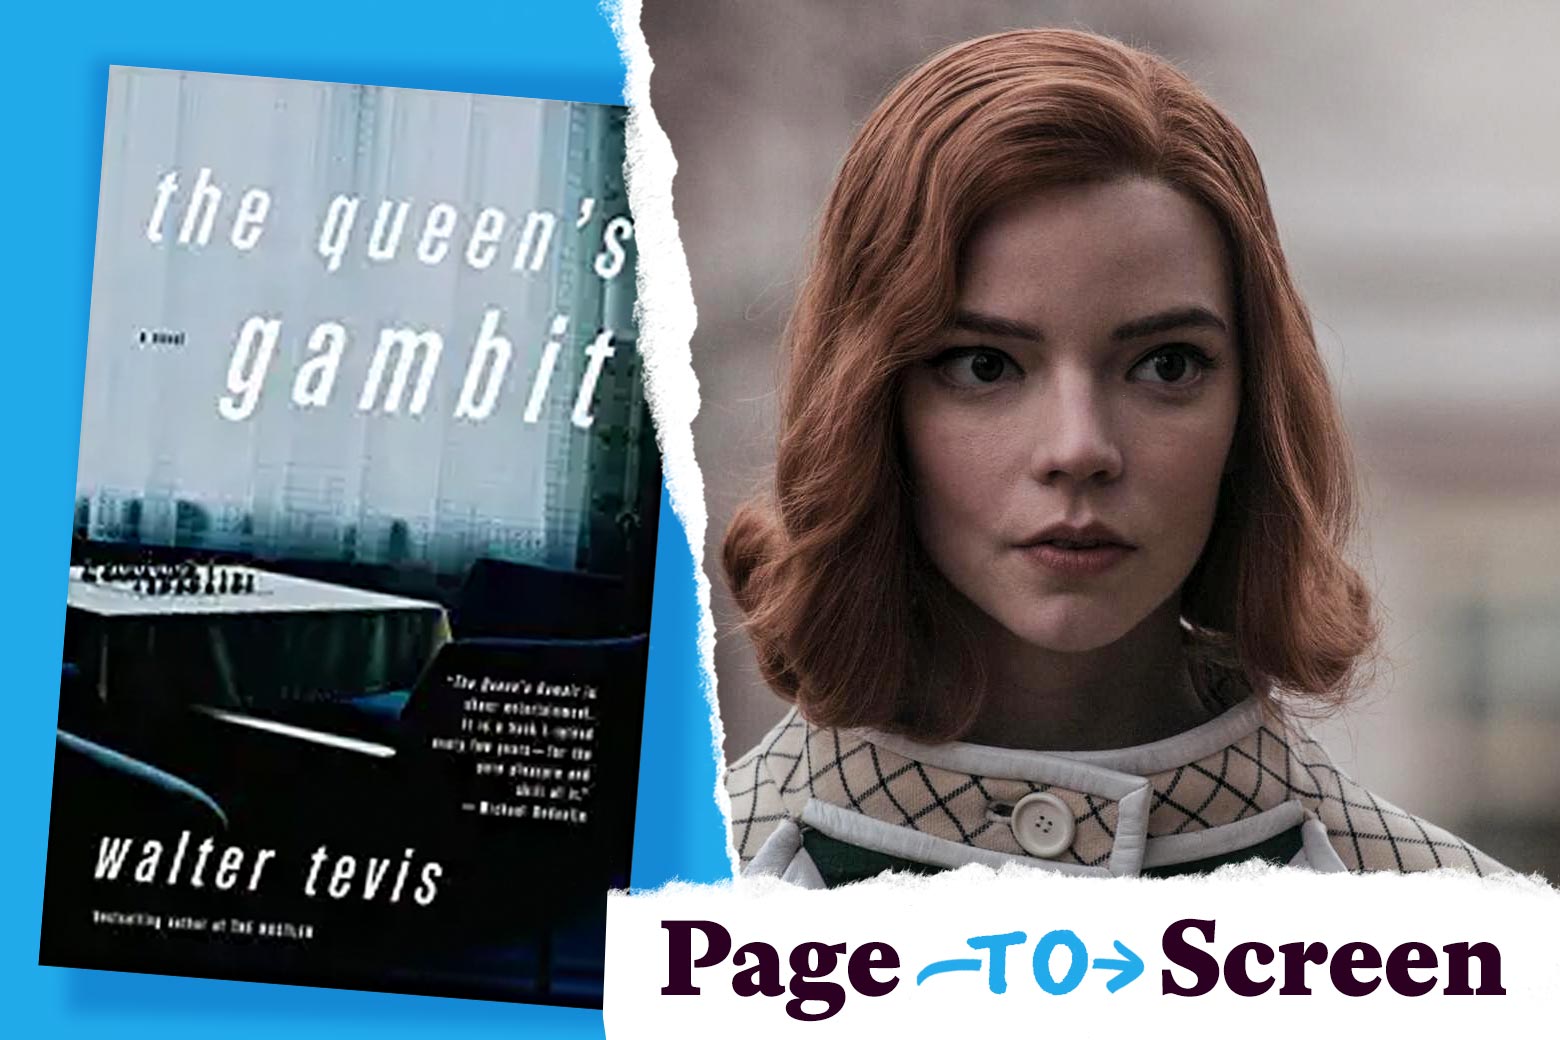 Left, the cover of The Queen’s Gambit by Walter Tevis. Right, Anya Taylor-Joy as Beth Harmon. In the corner, a tearaway logo reads “Page to Screen.”